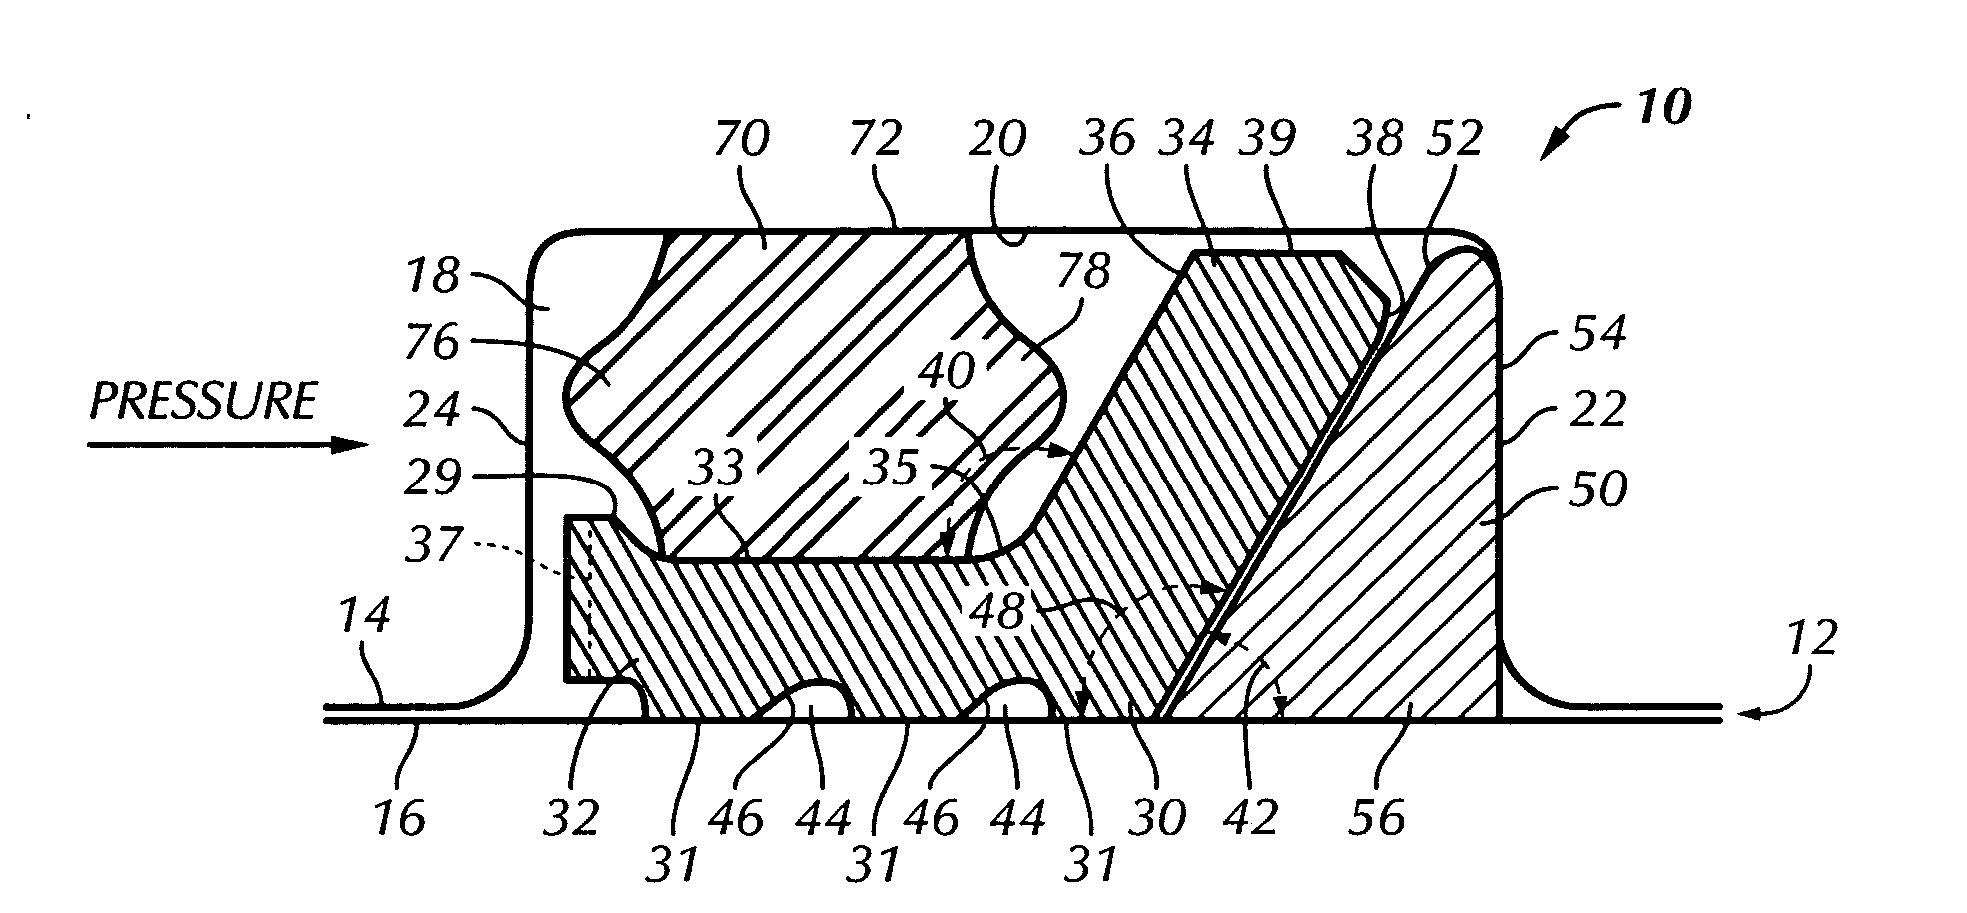 Cammed seal assembly with elastomeric energizer element